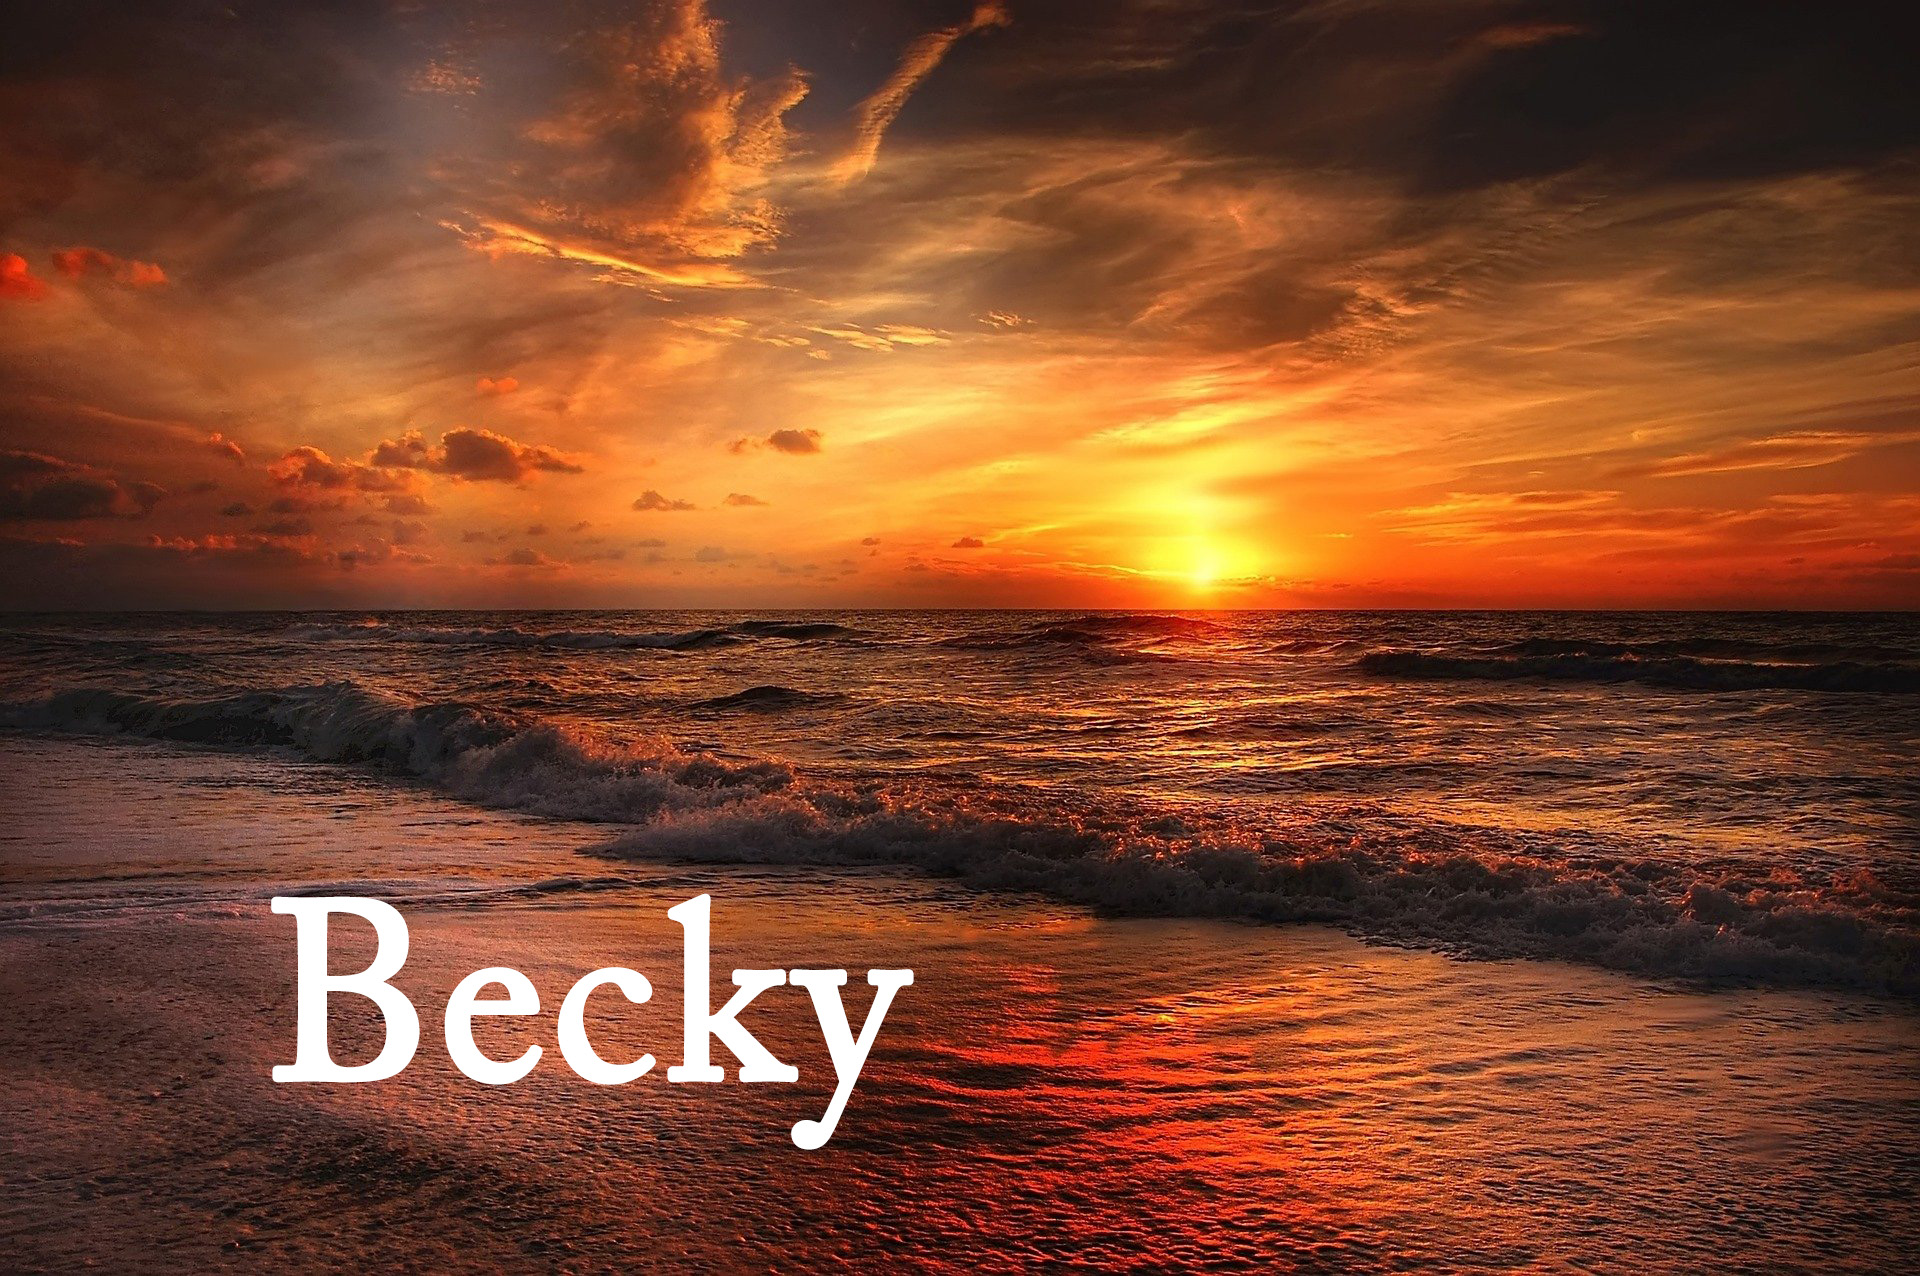 See Becky's page